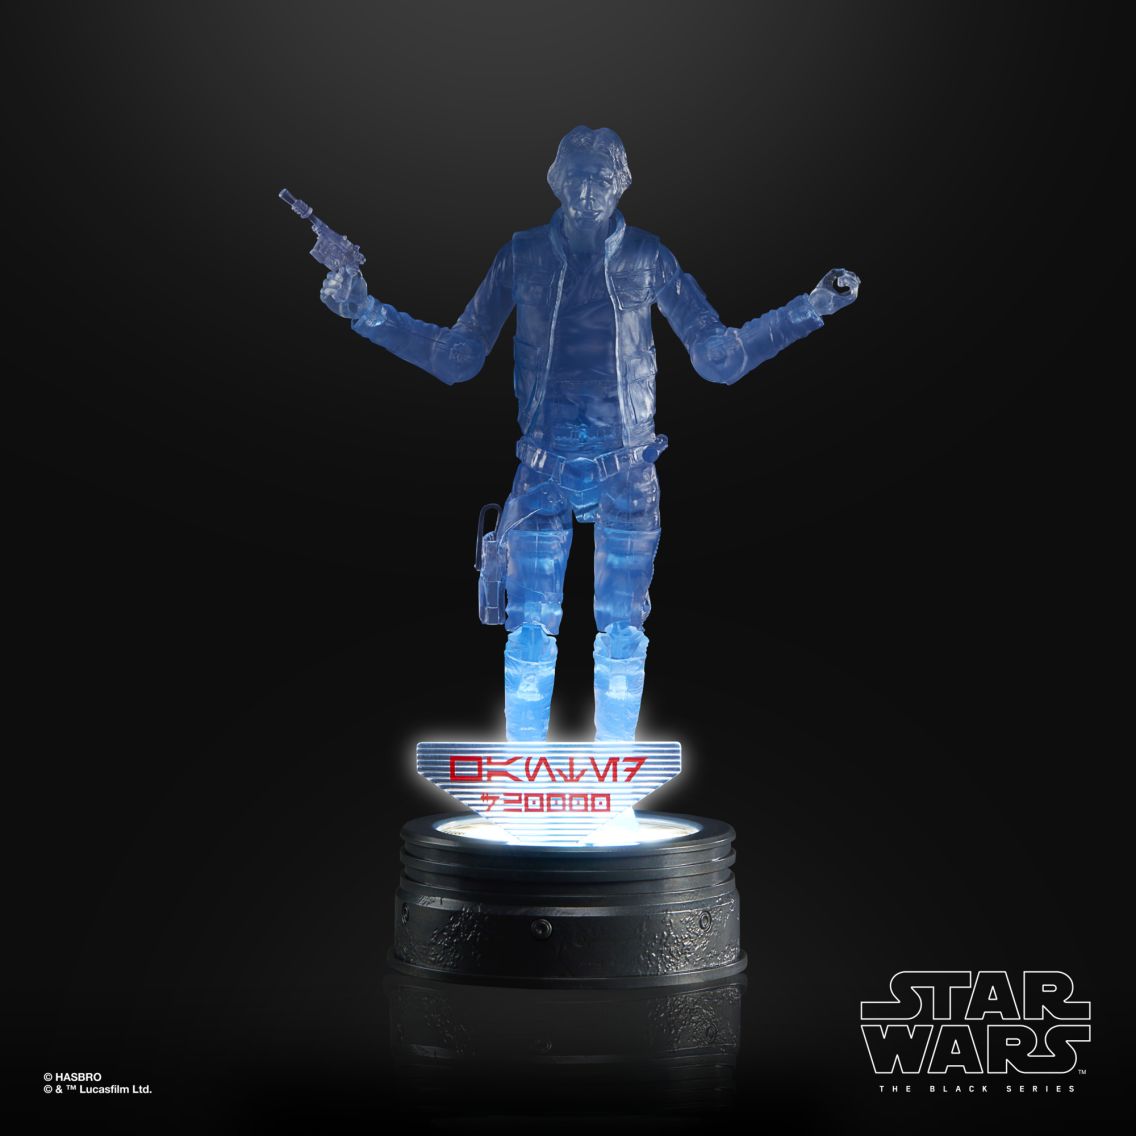 Hasbro - Star Wars: The Black Series - Han Solo (Holocomm Collection) (6&quot;) 42/49 - Marvelous Toys